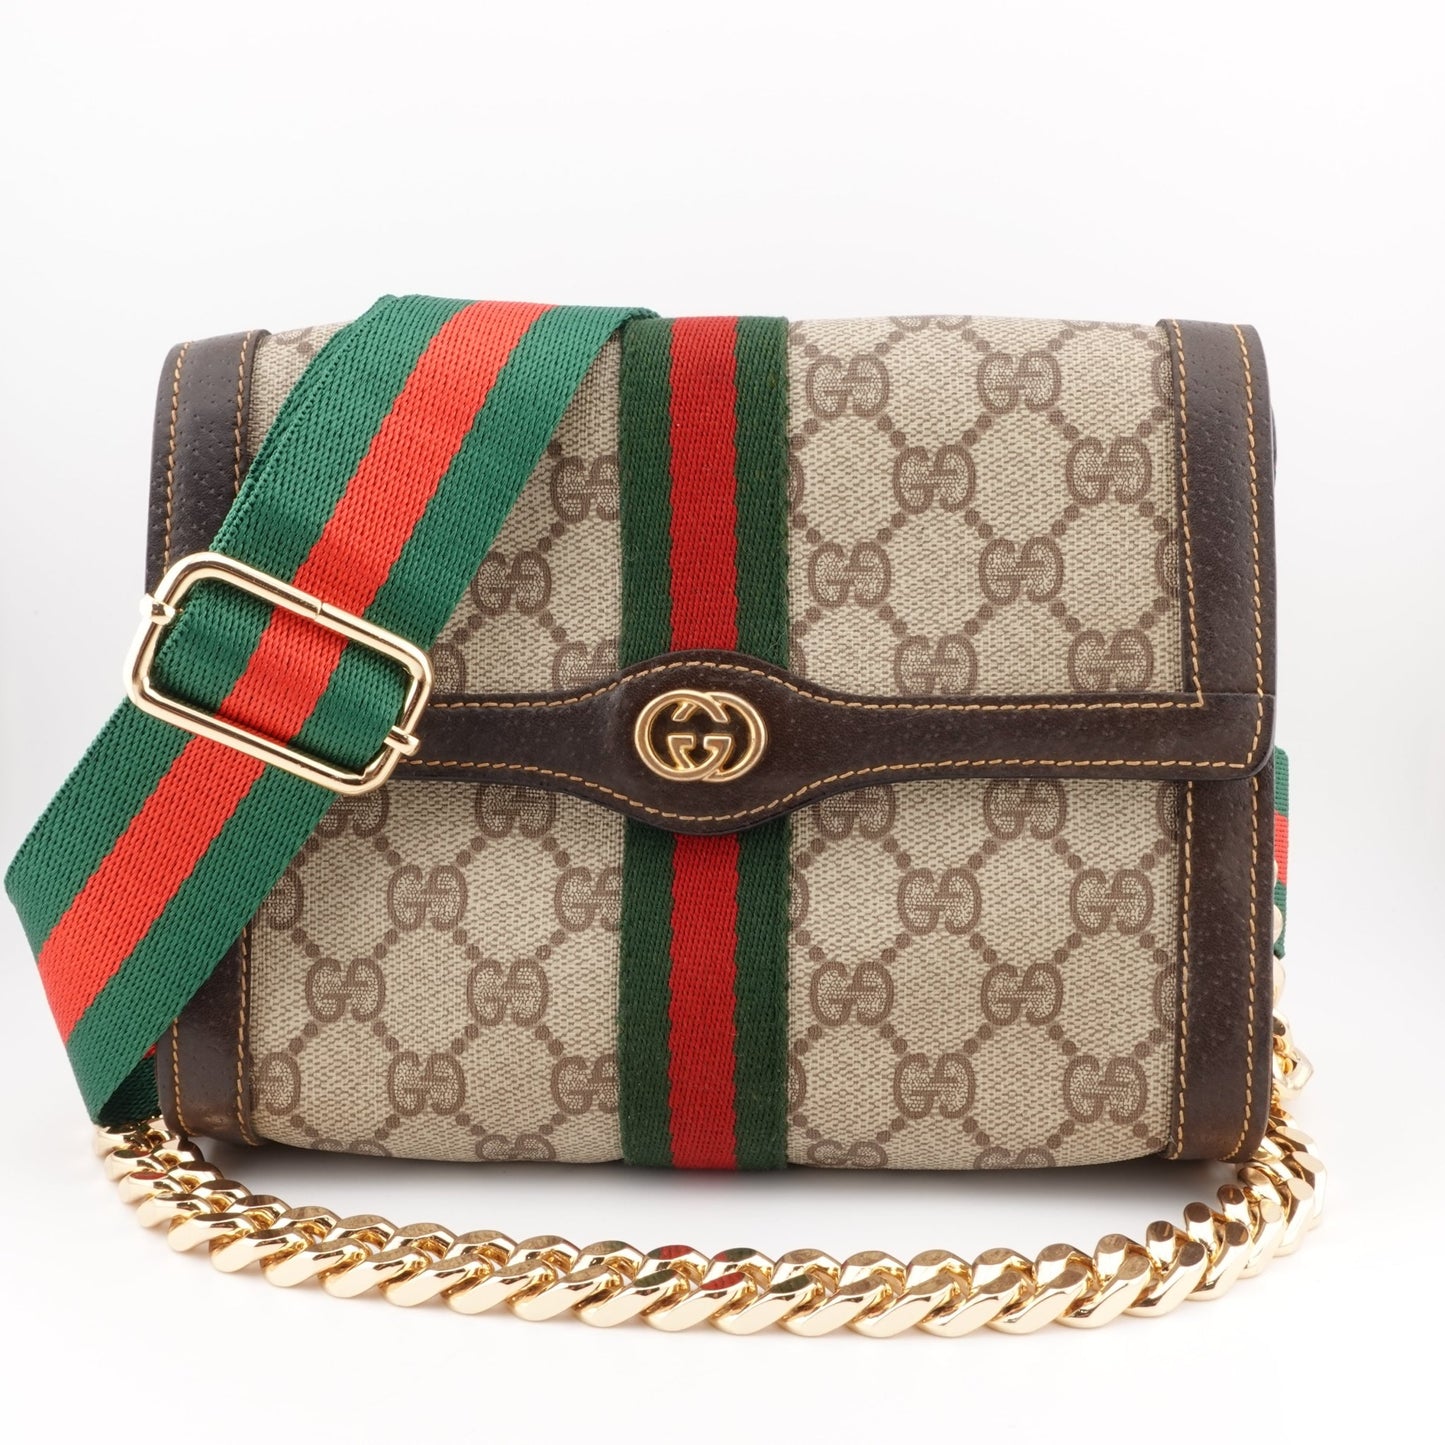 GUCCI Small Ophidia Clutch with Strap & Chain - Bag Envy